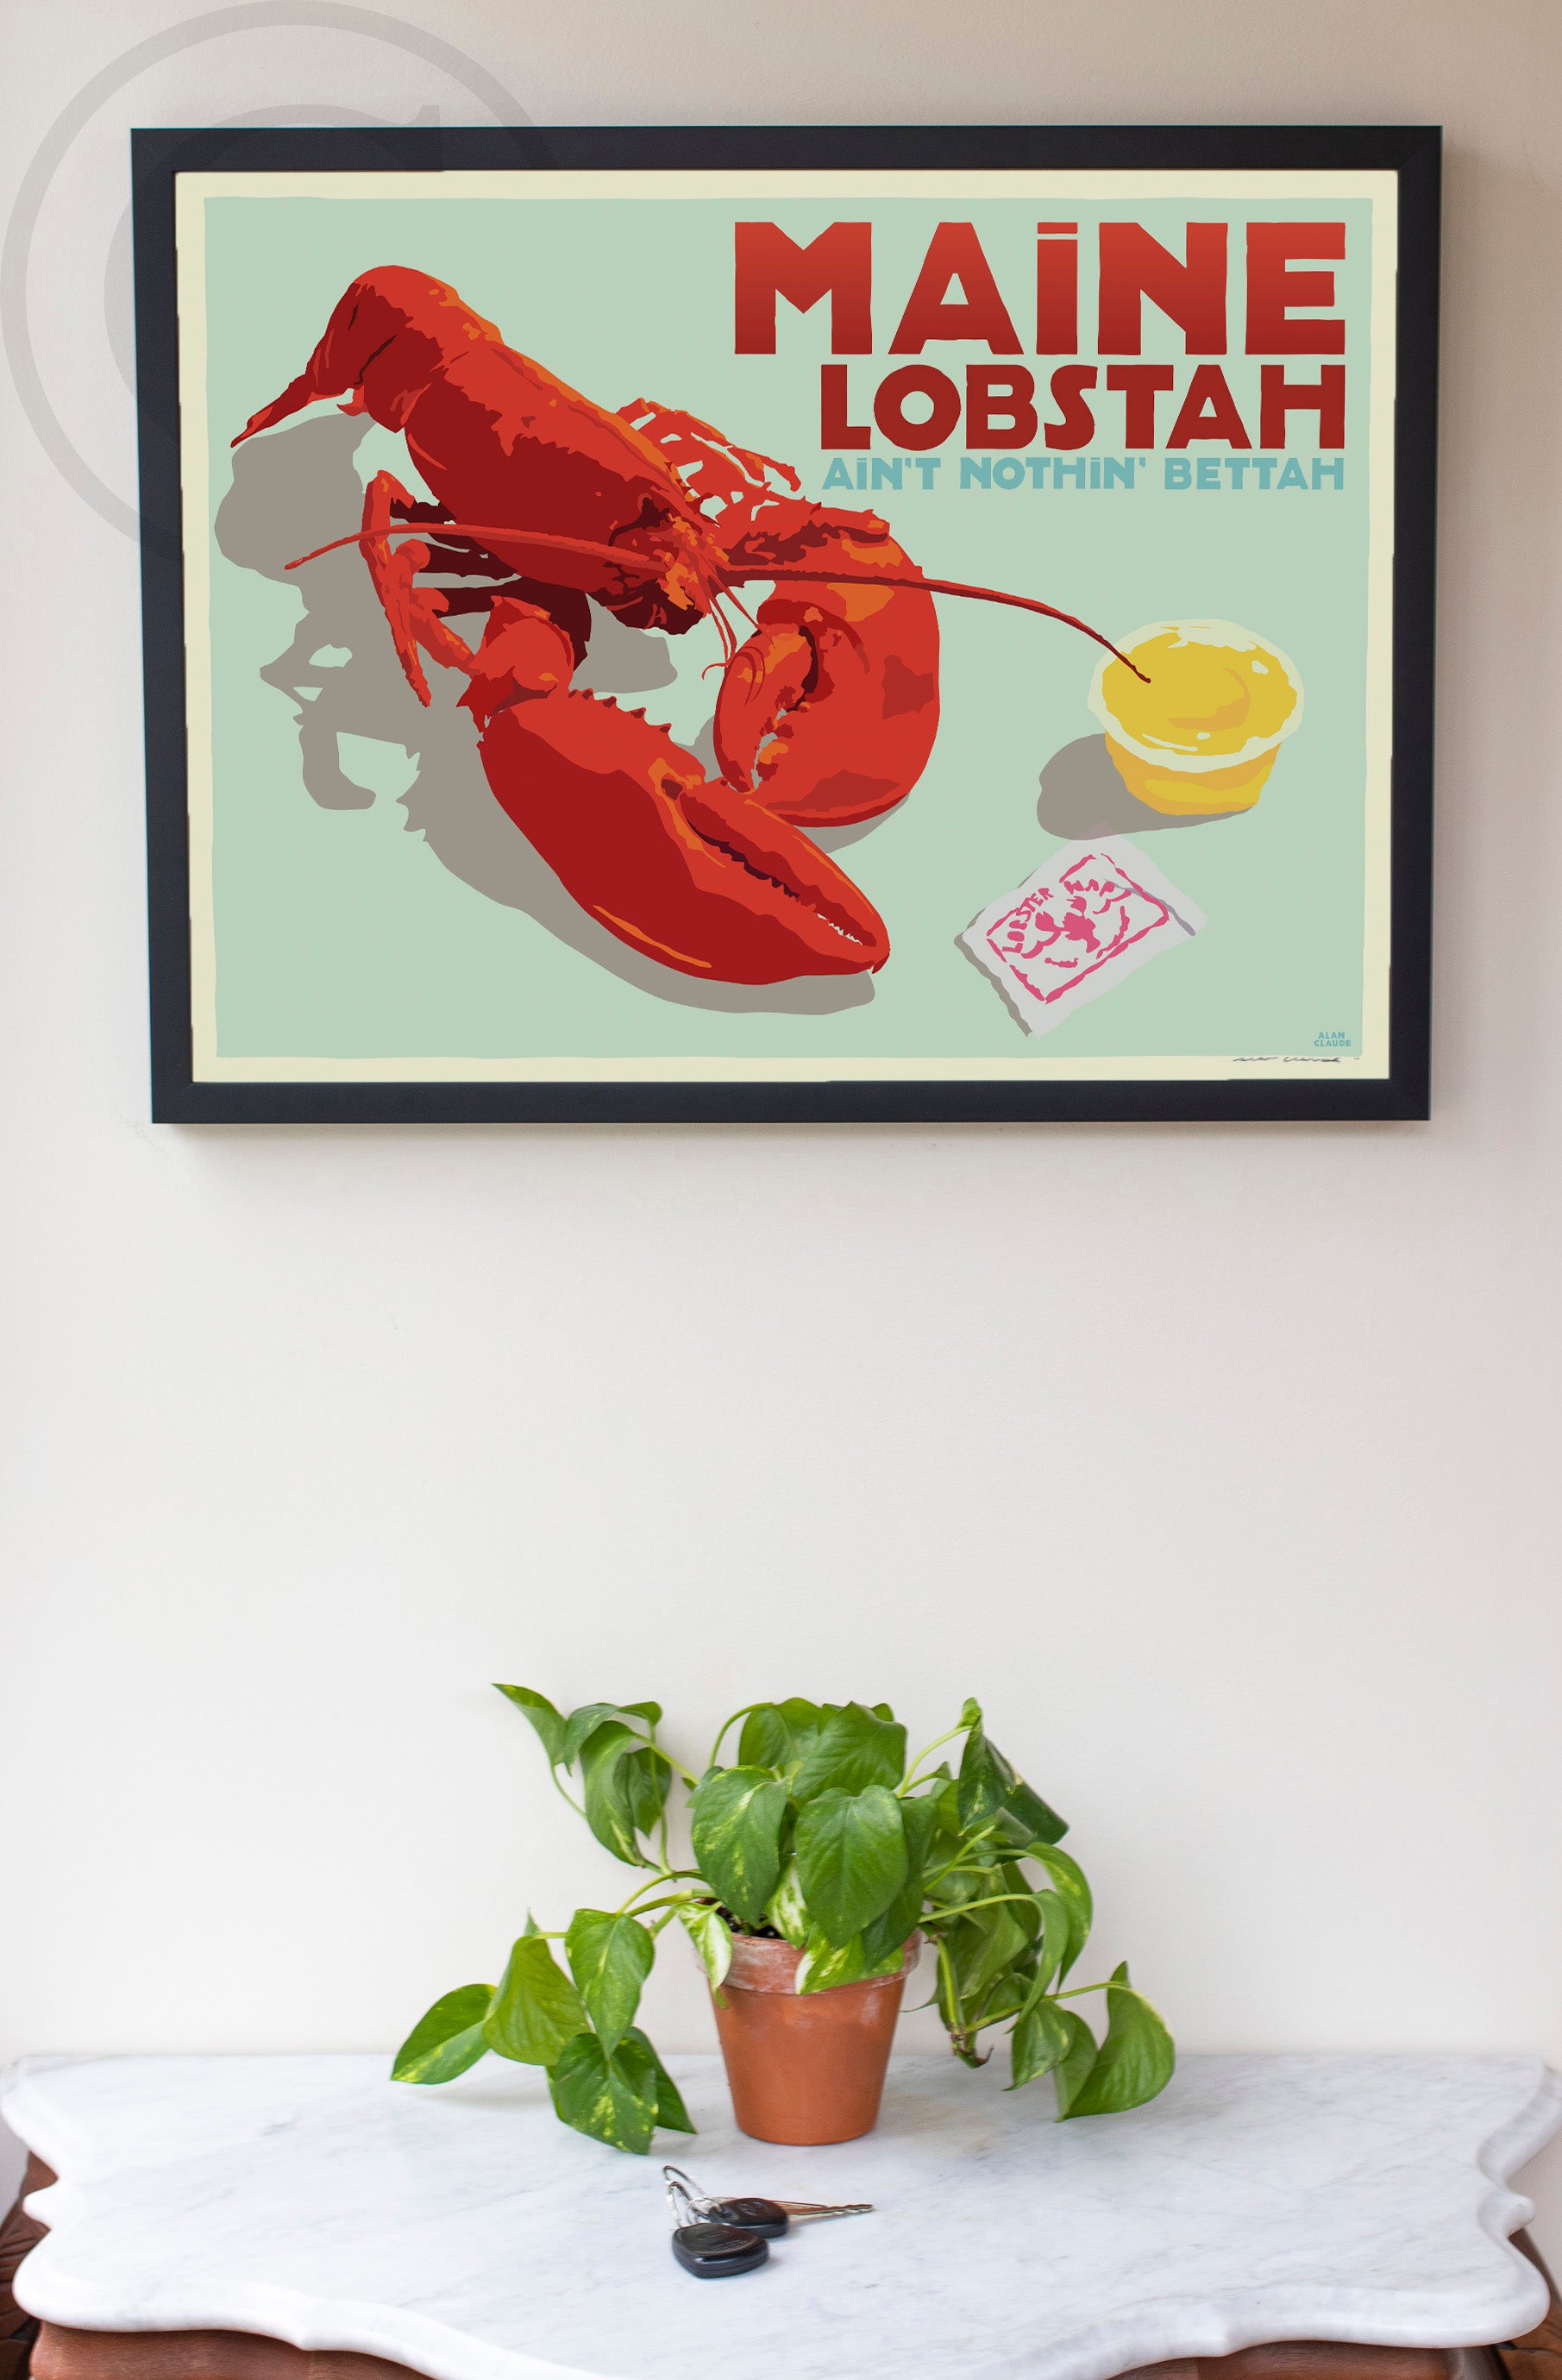 Maine Lobstah With Butter Art Print 18" x 24" Horizontal Framed Wall Poster By Alan Claude - Maine